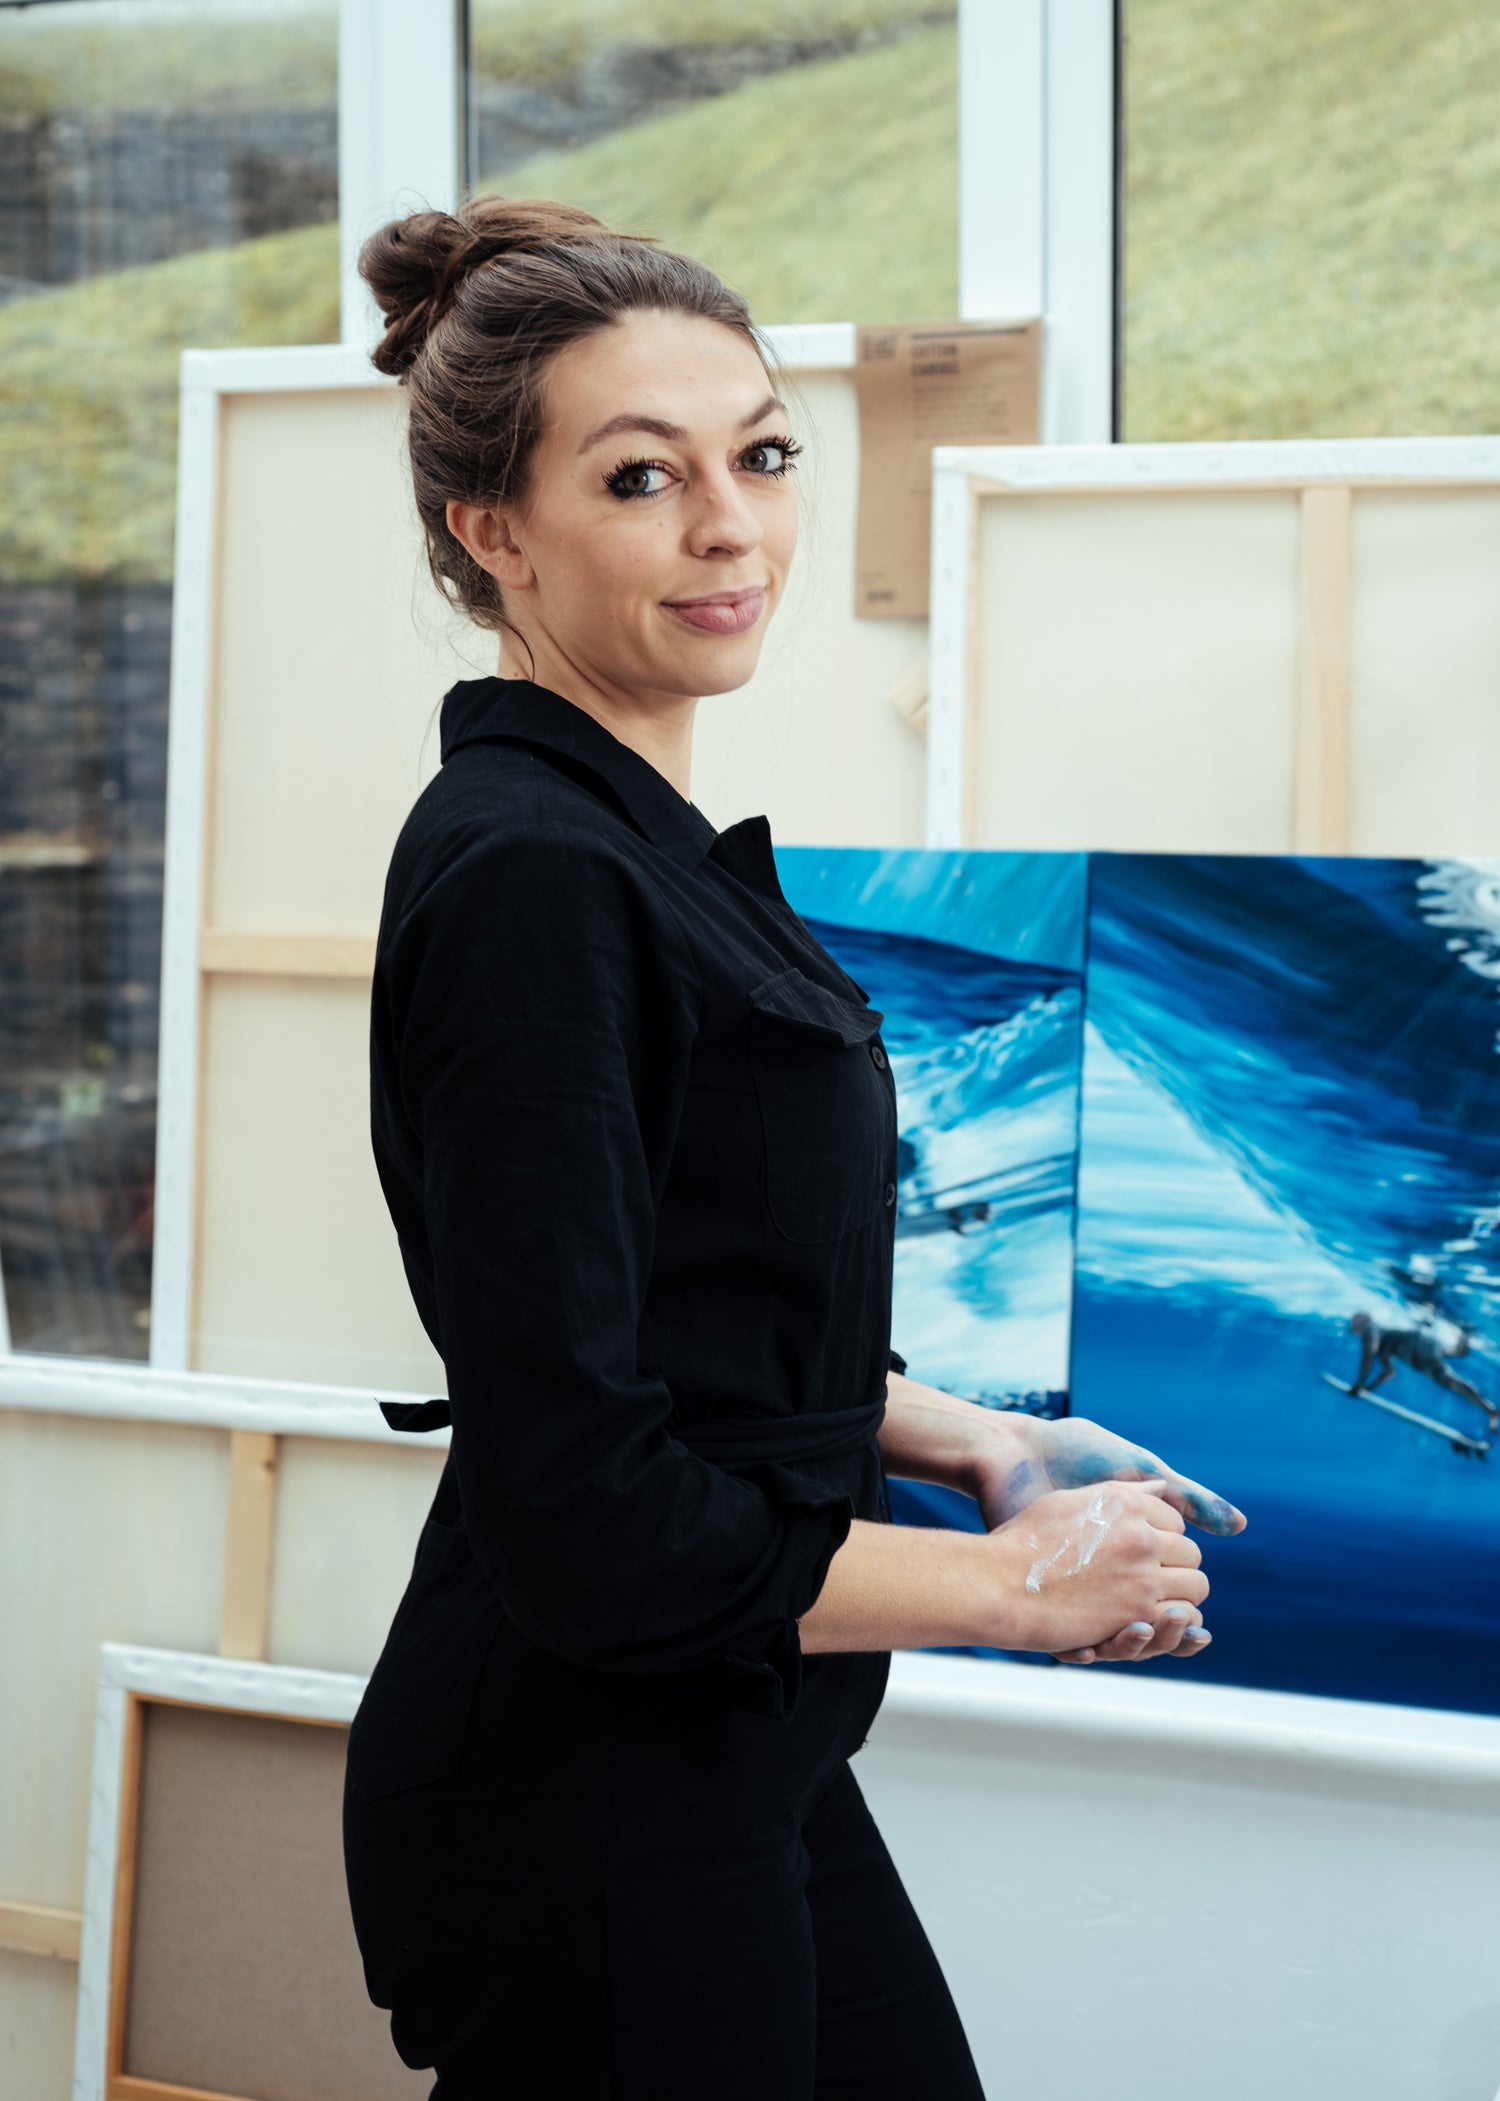 About Phoebe Pocock, a female Cornish artist creating contemporary wave and surf art.